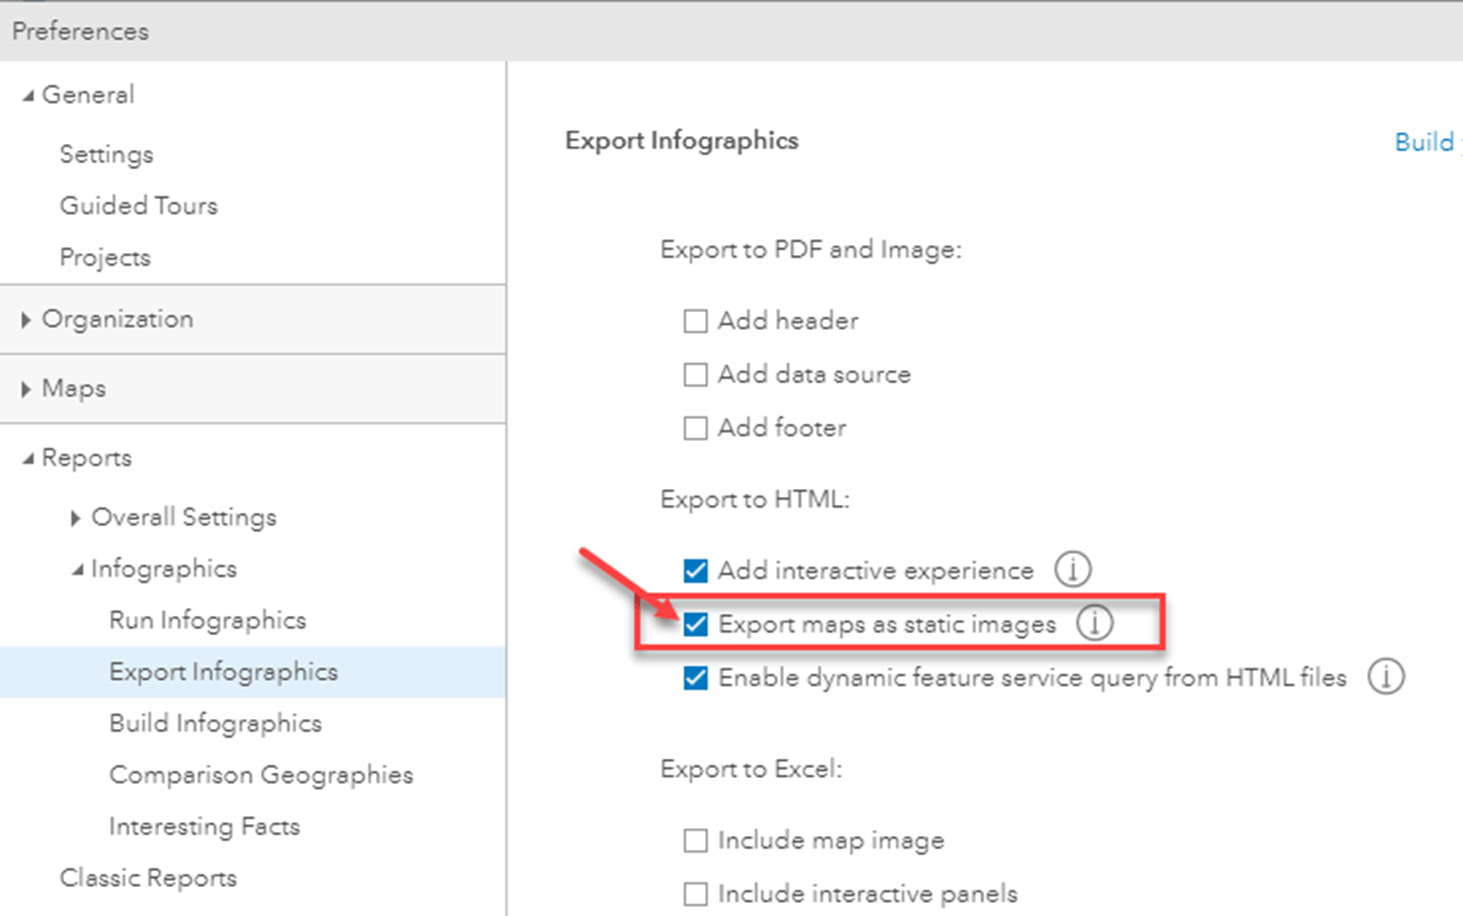 Open the Preferences setting for batch exporting of static maps